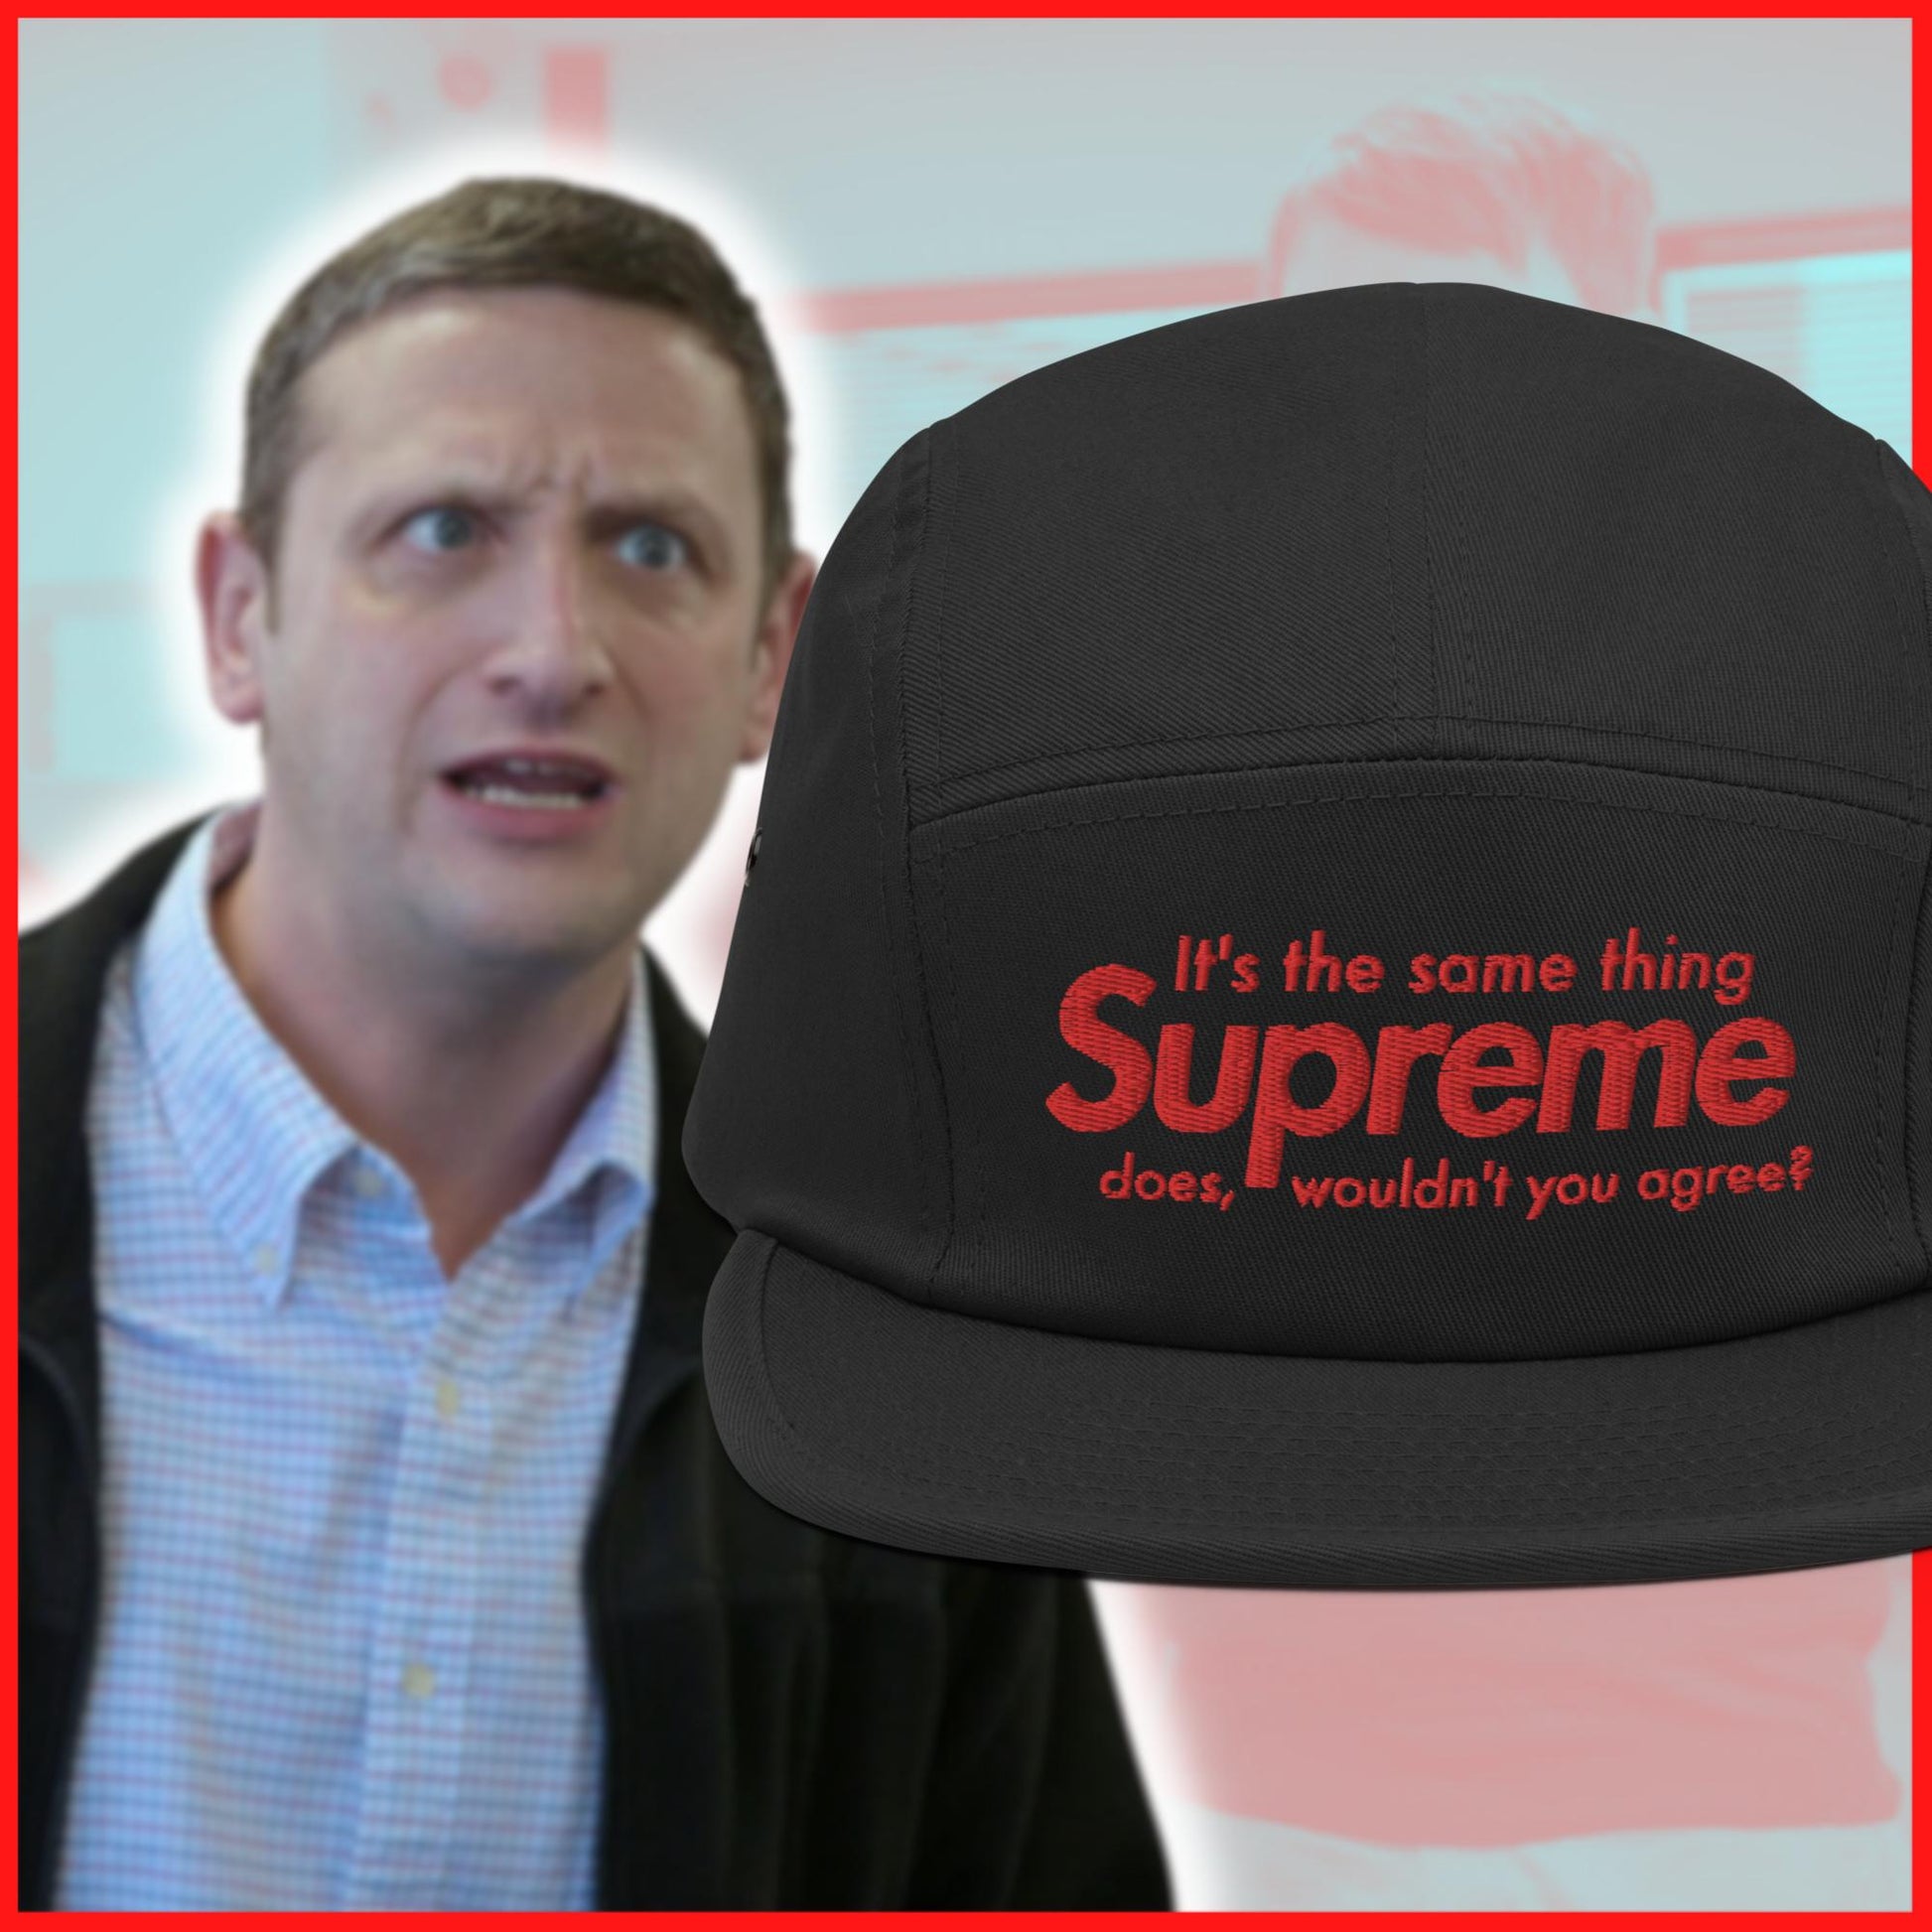 Wouldn't You Agree? Five Panel Hat – I Think You Should Affirm